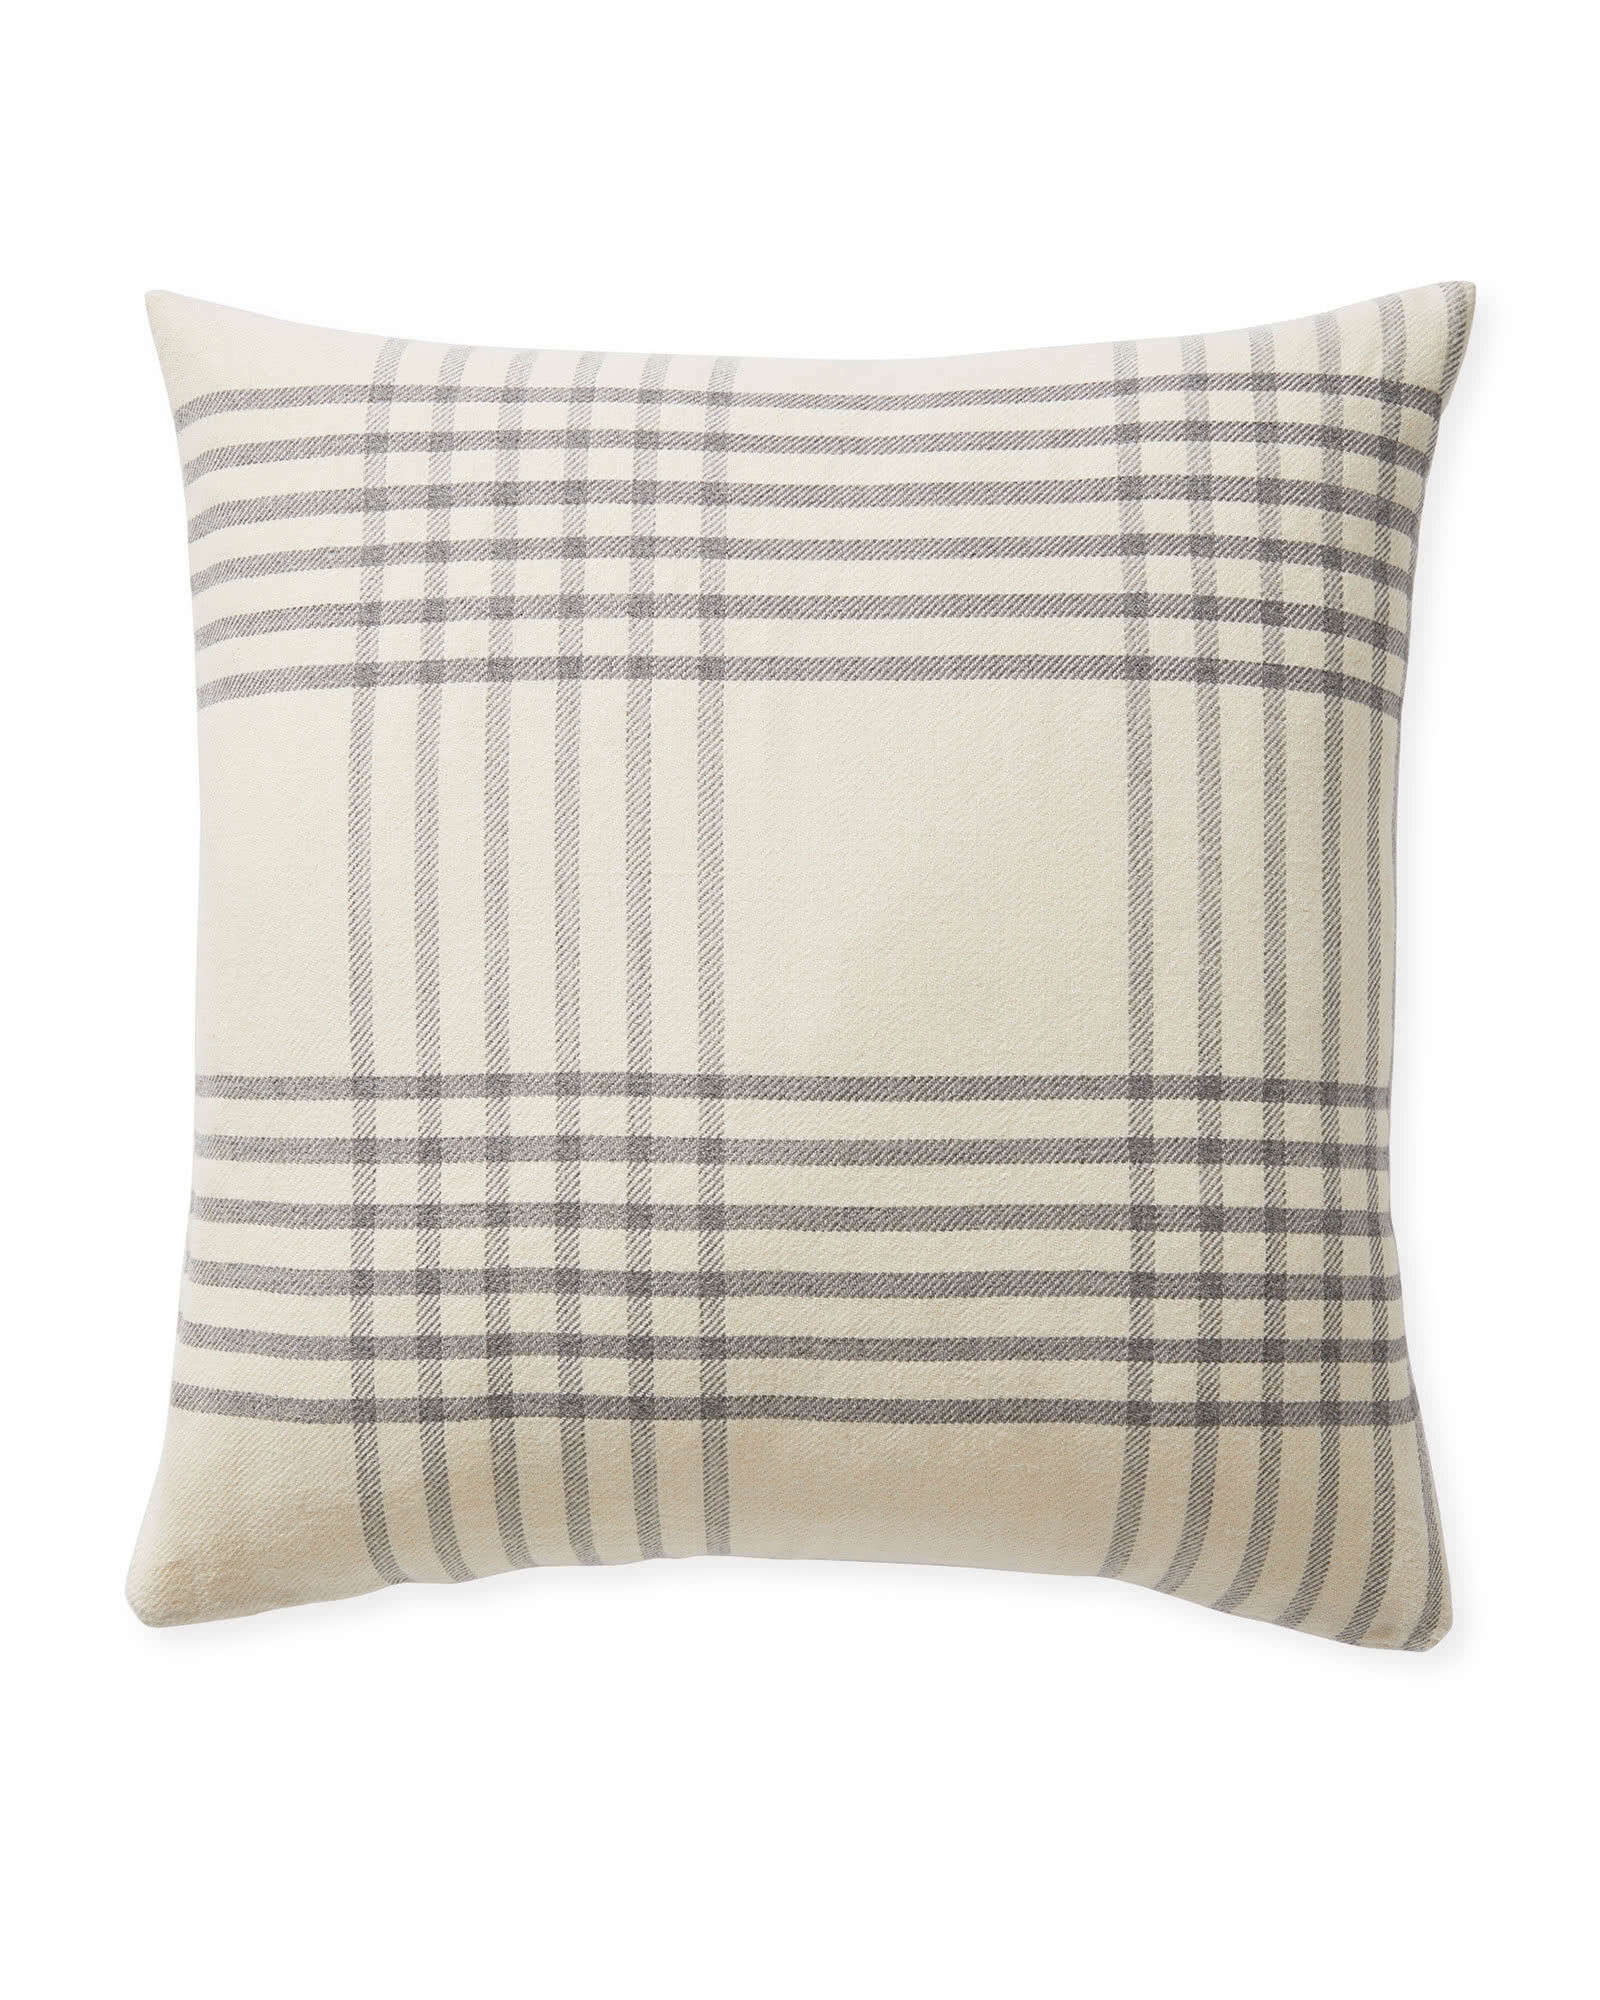 Blakely Plaid Pillow Cover, Ivory & Gray, 24" x 24" - Image 0